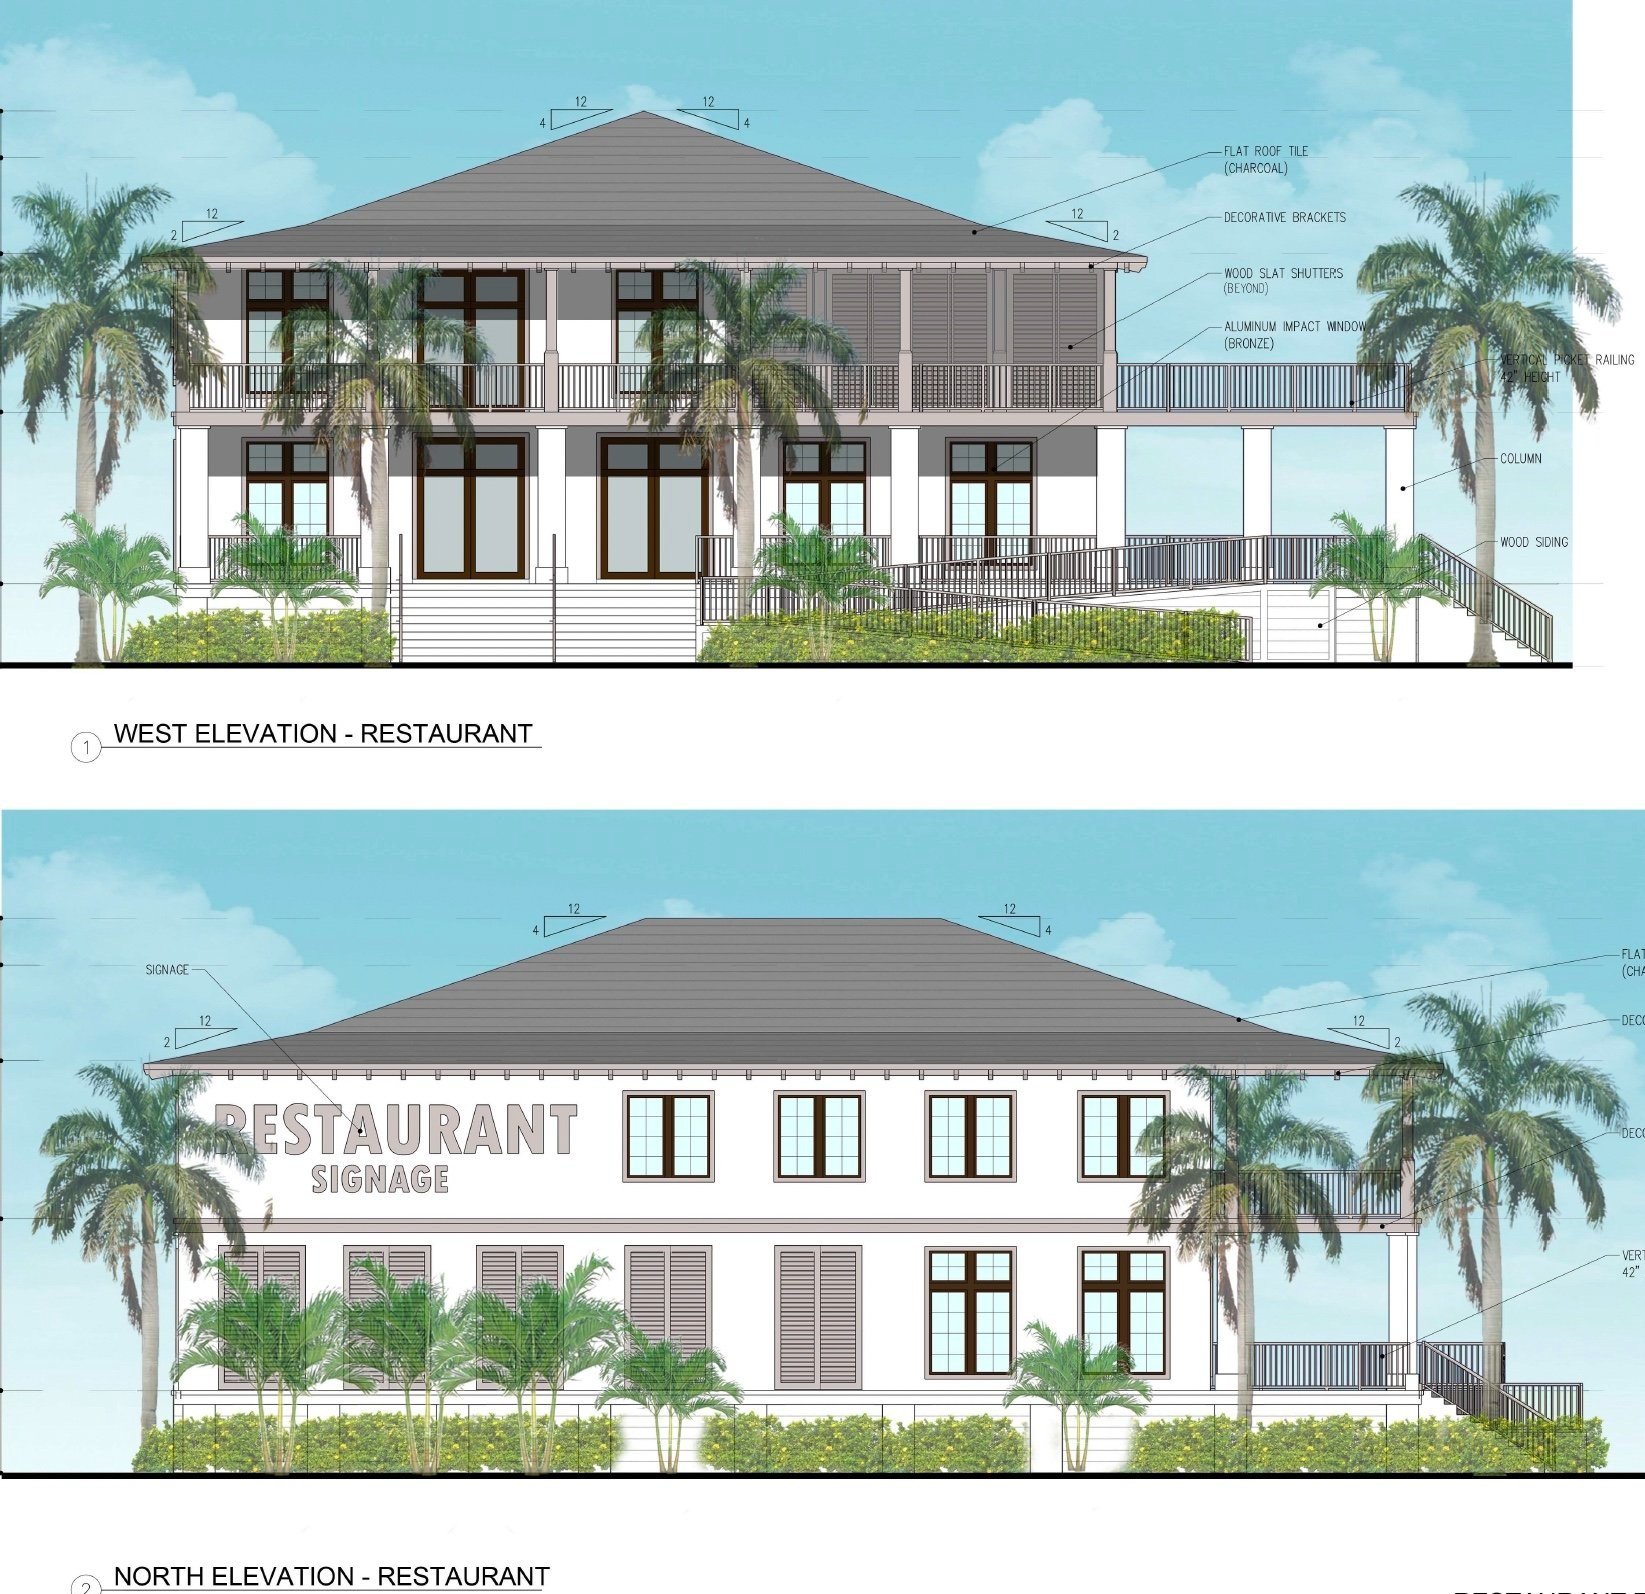 376-unit mixed-use development approved for Gandy Blvd in St. Pete